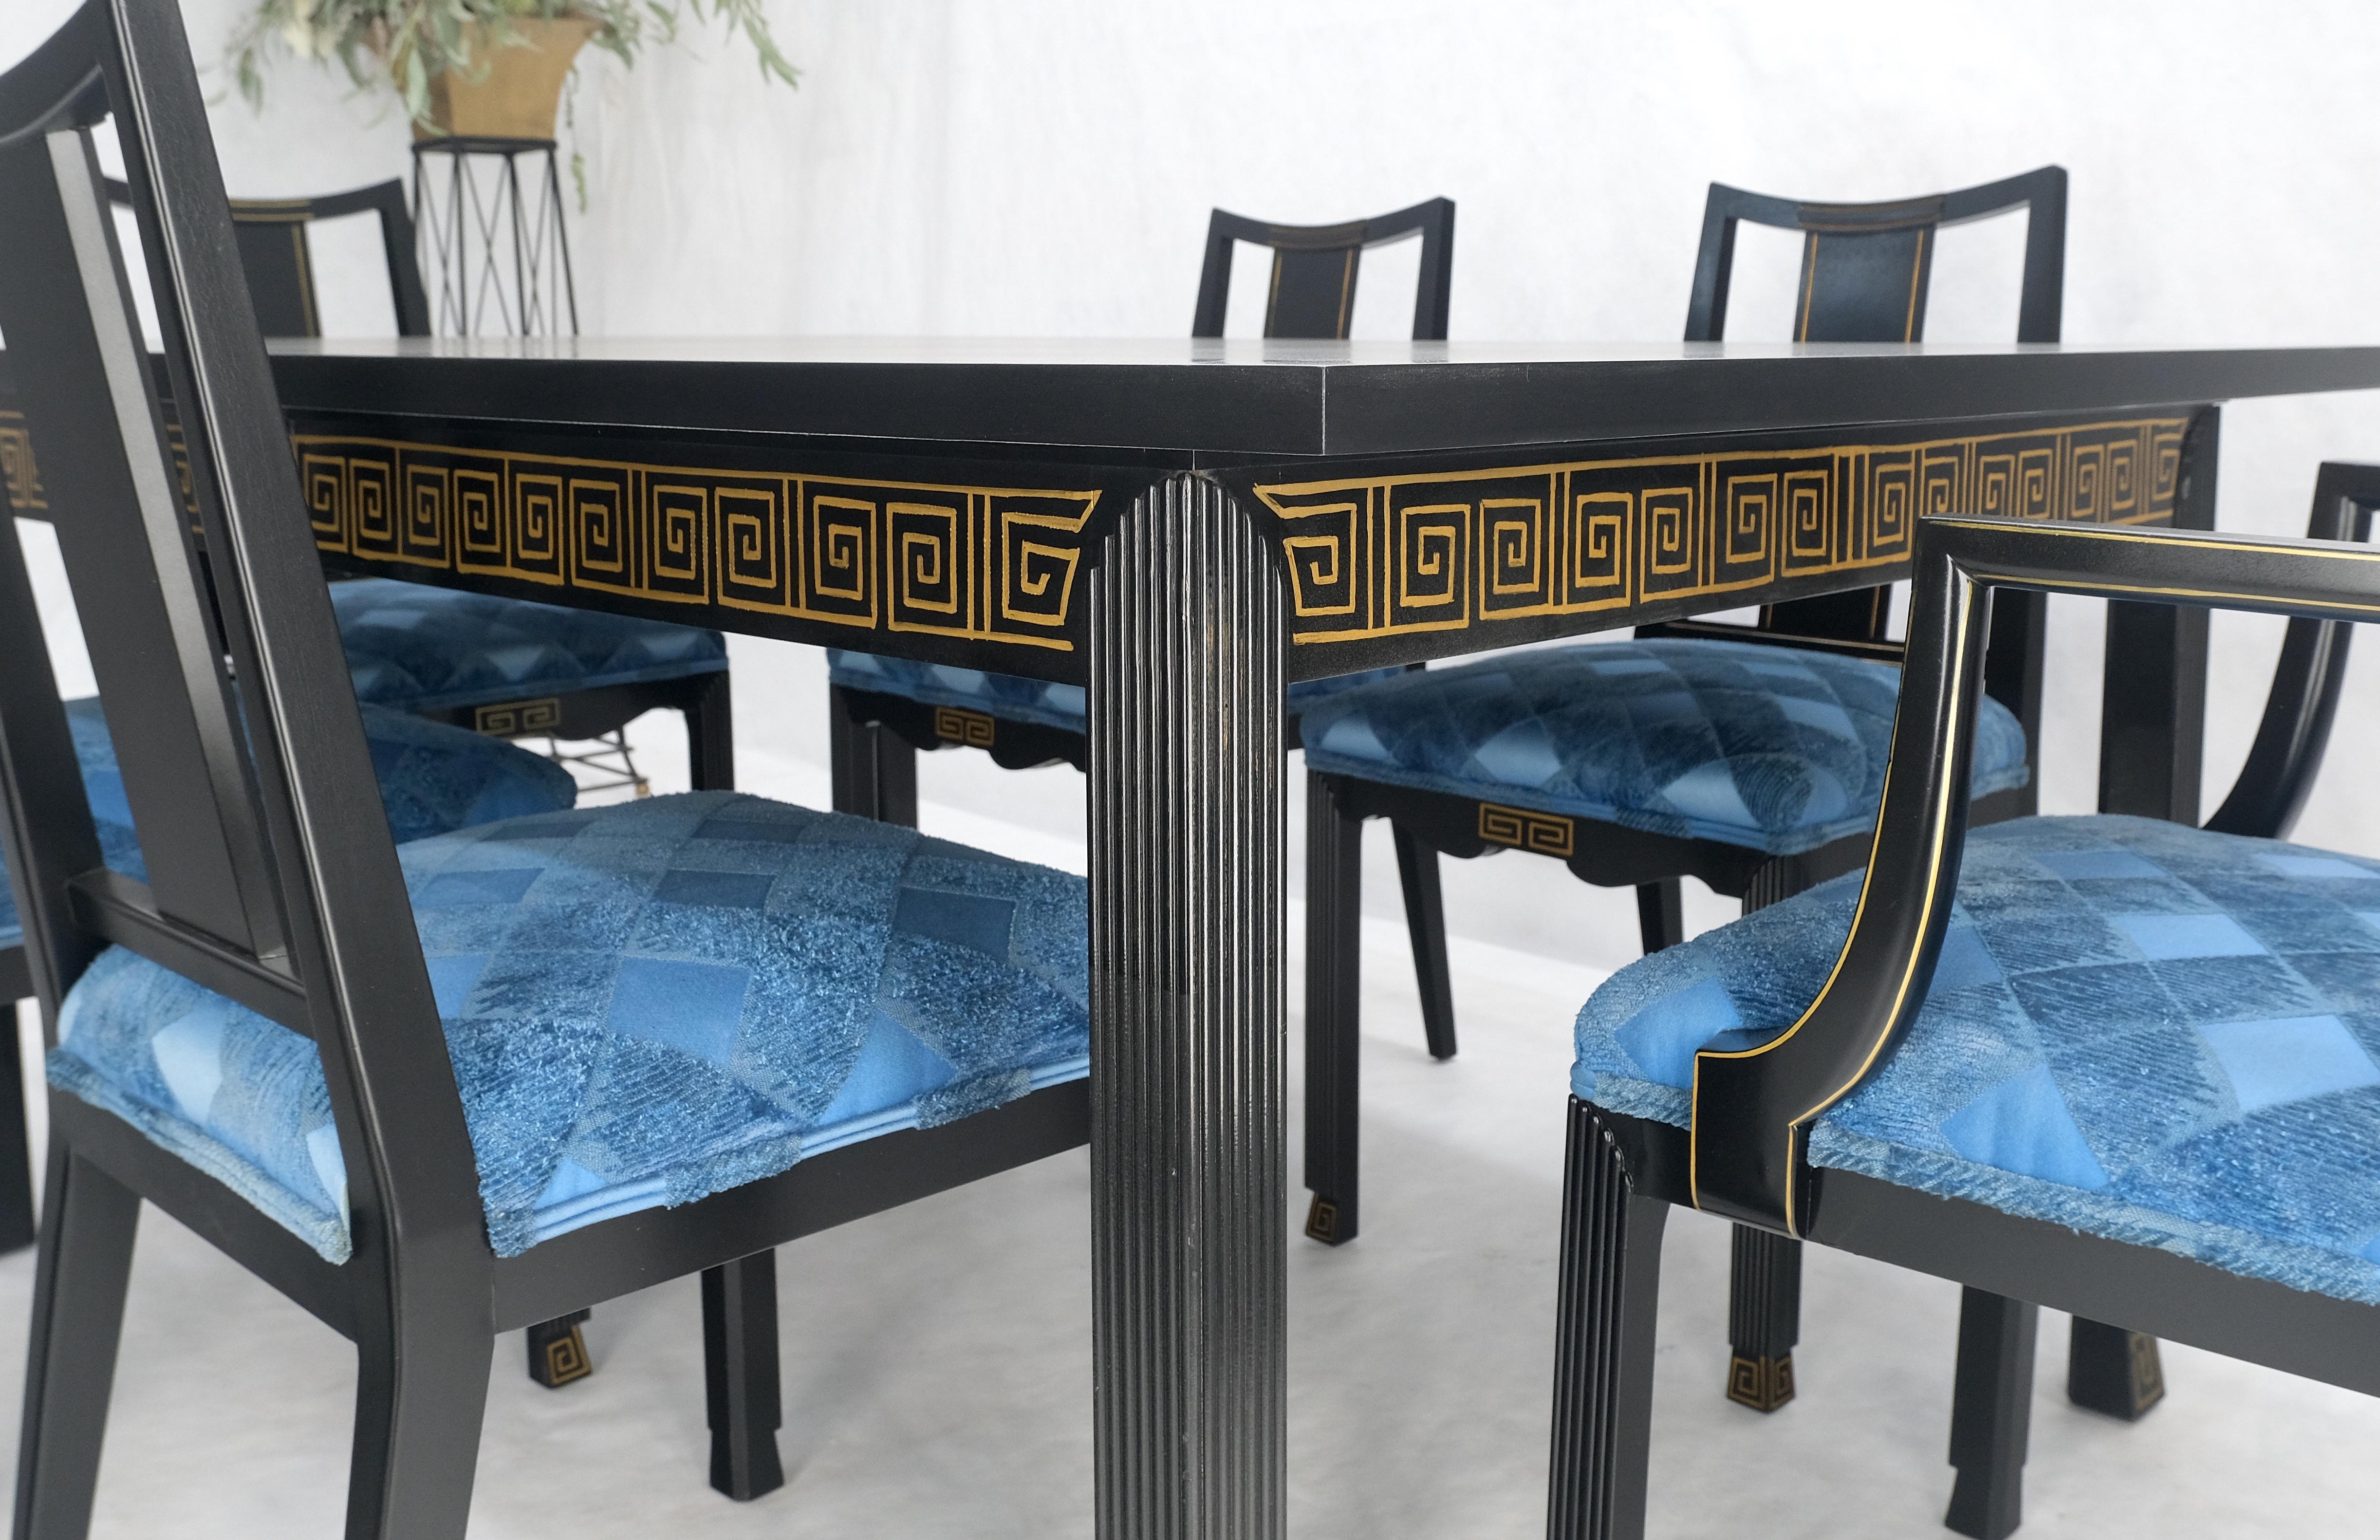 Al Huller Black Lacquer Gold Ornament Decorated 6 Chairs 2 Leaves Blue Upholstery 2 Arm Chairs Dining Table Set MINT!
The chairs are very solid and feel like one piece of wood with nice weight to them, compact and comfortable design.

chair